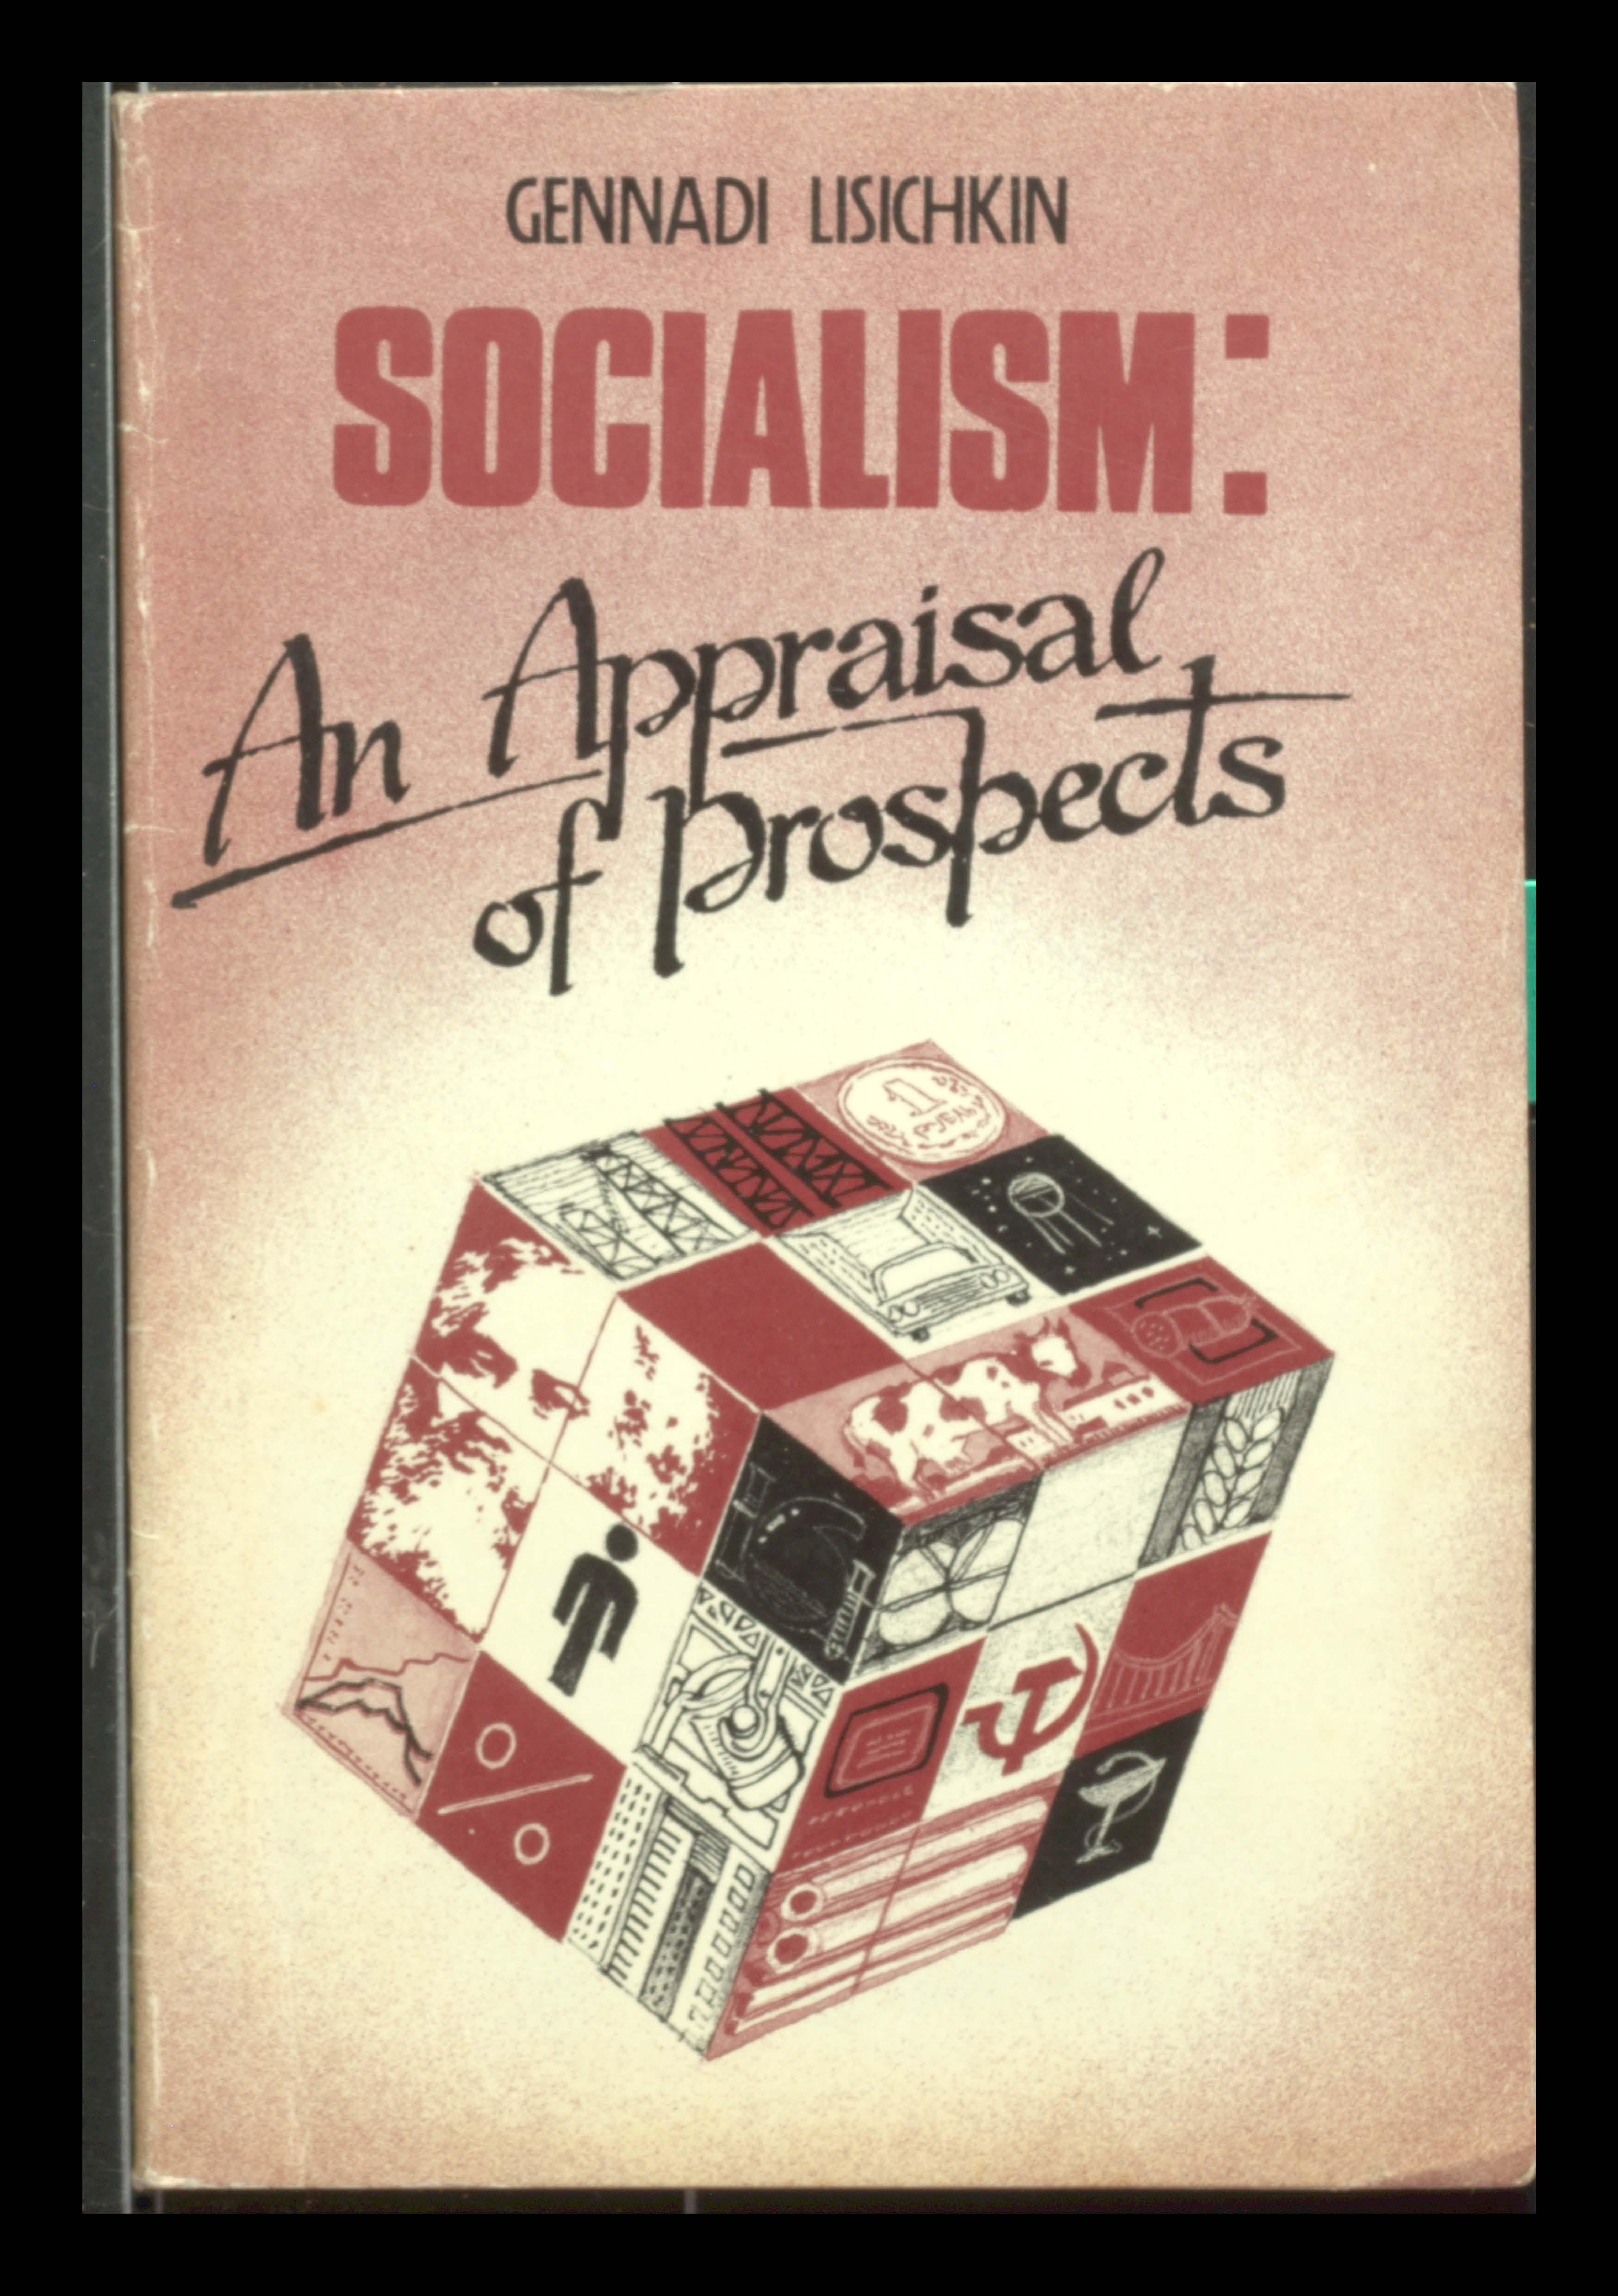 Socialism and capitalism: score and prospects